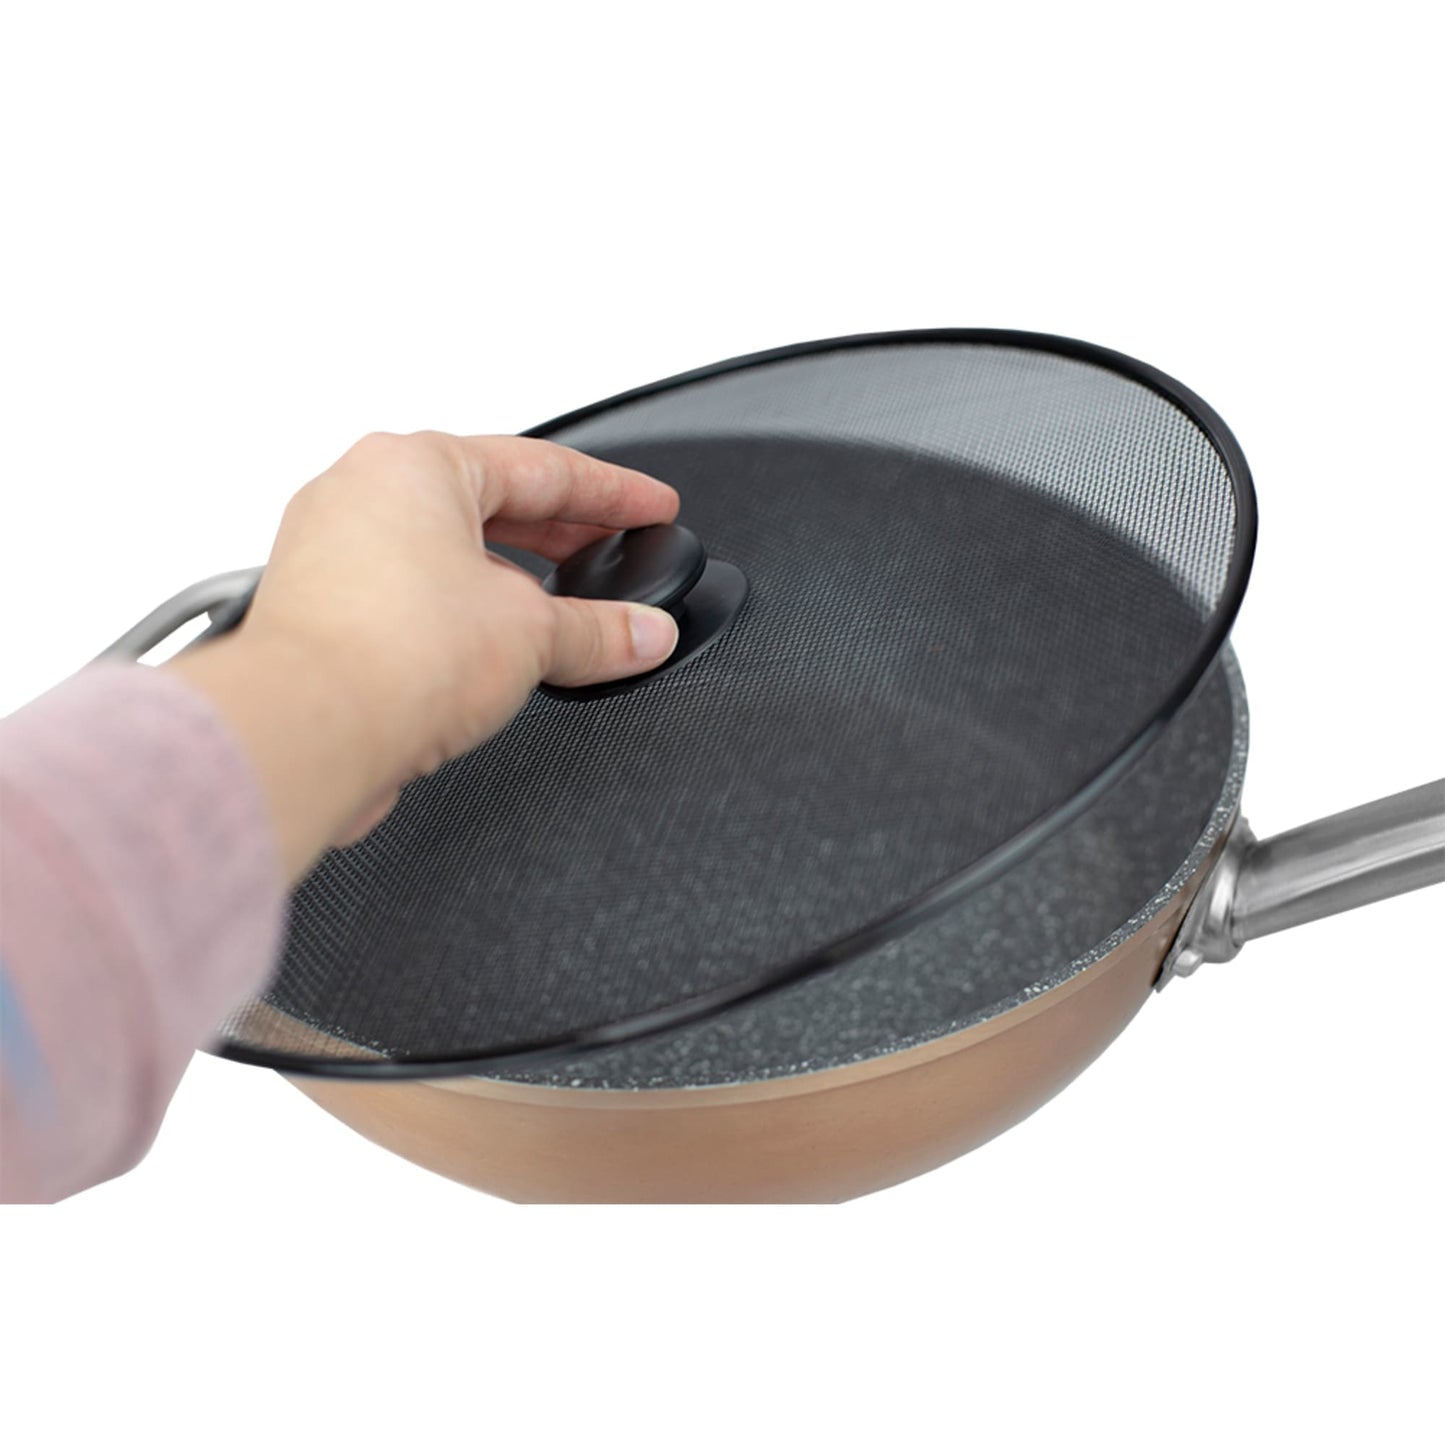 Fine Steel Mesh Cooking Grease and Oil Splatter Guard Screen Set for 11 inch Pans with Easy Grip Plastic Handle